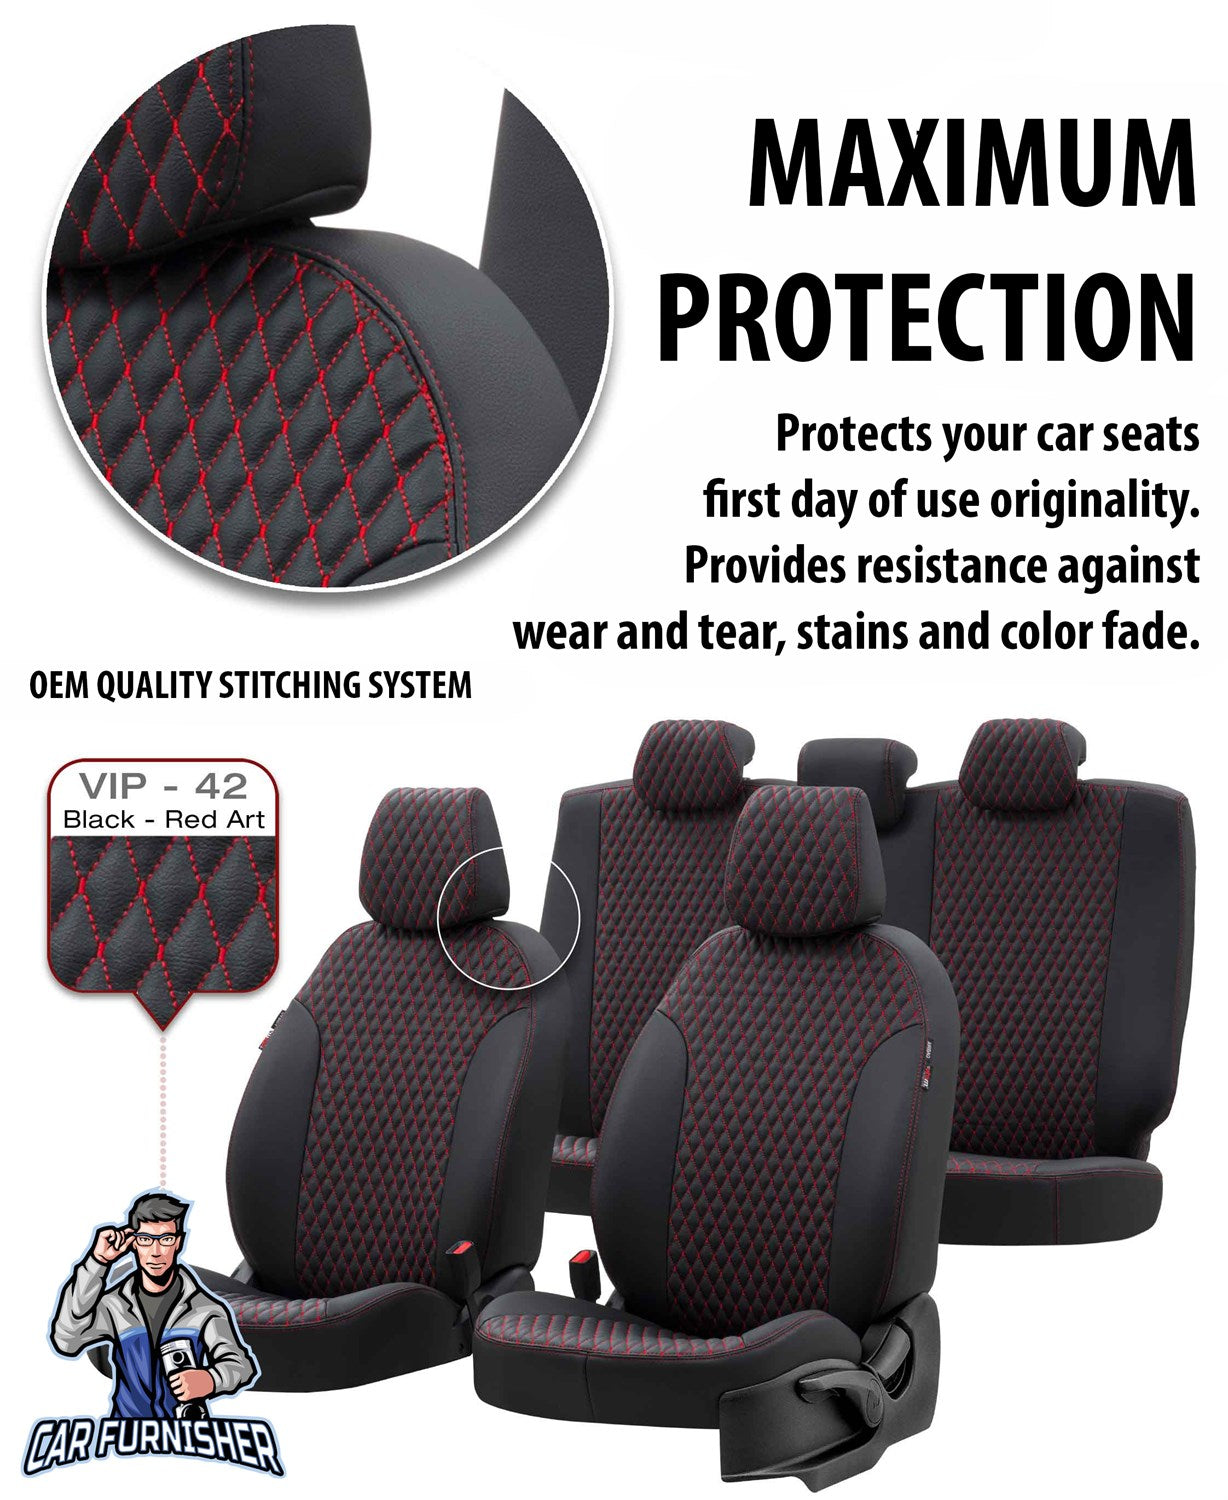 Toyota Avensis Seat Cover Amsterdam Leather Design Smoked Black Leather